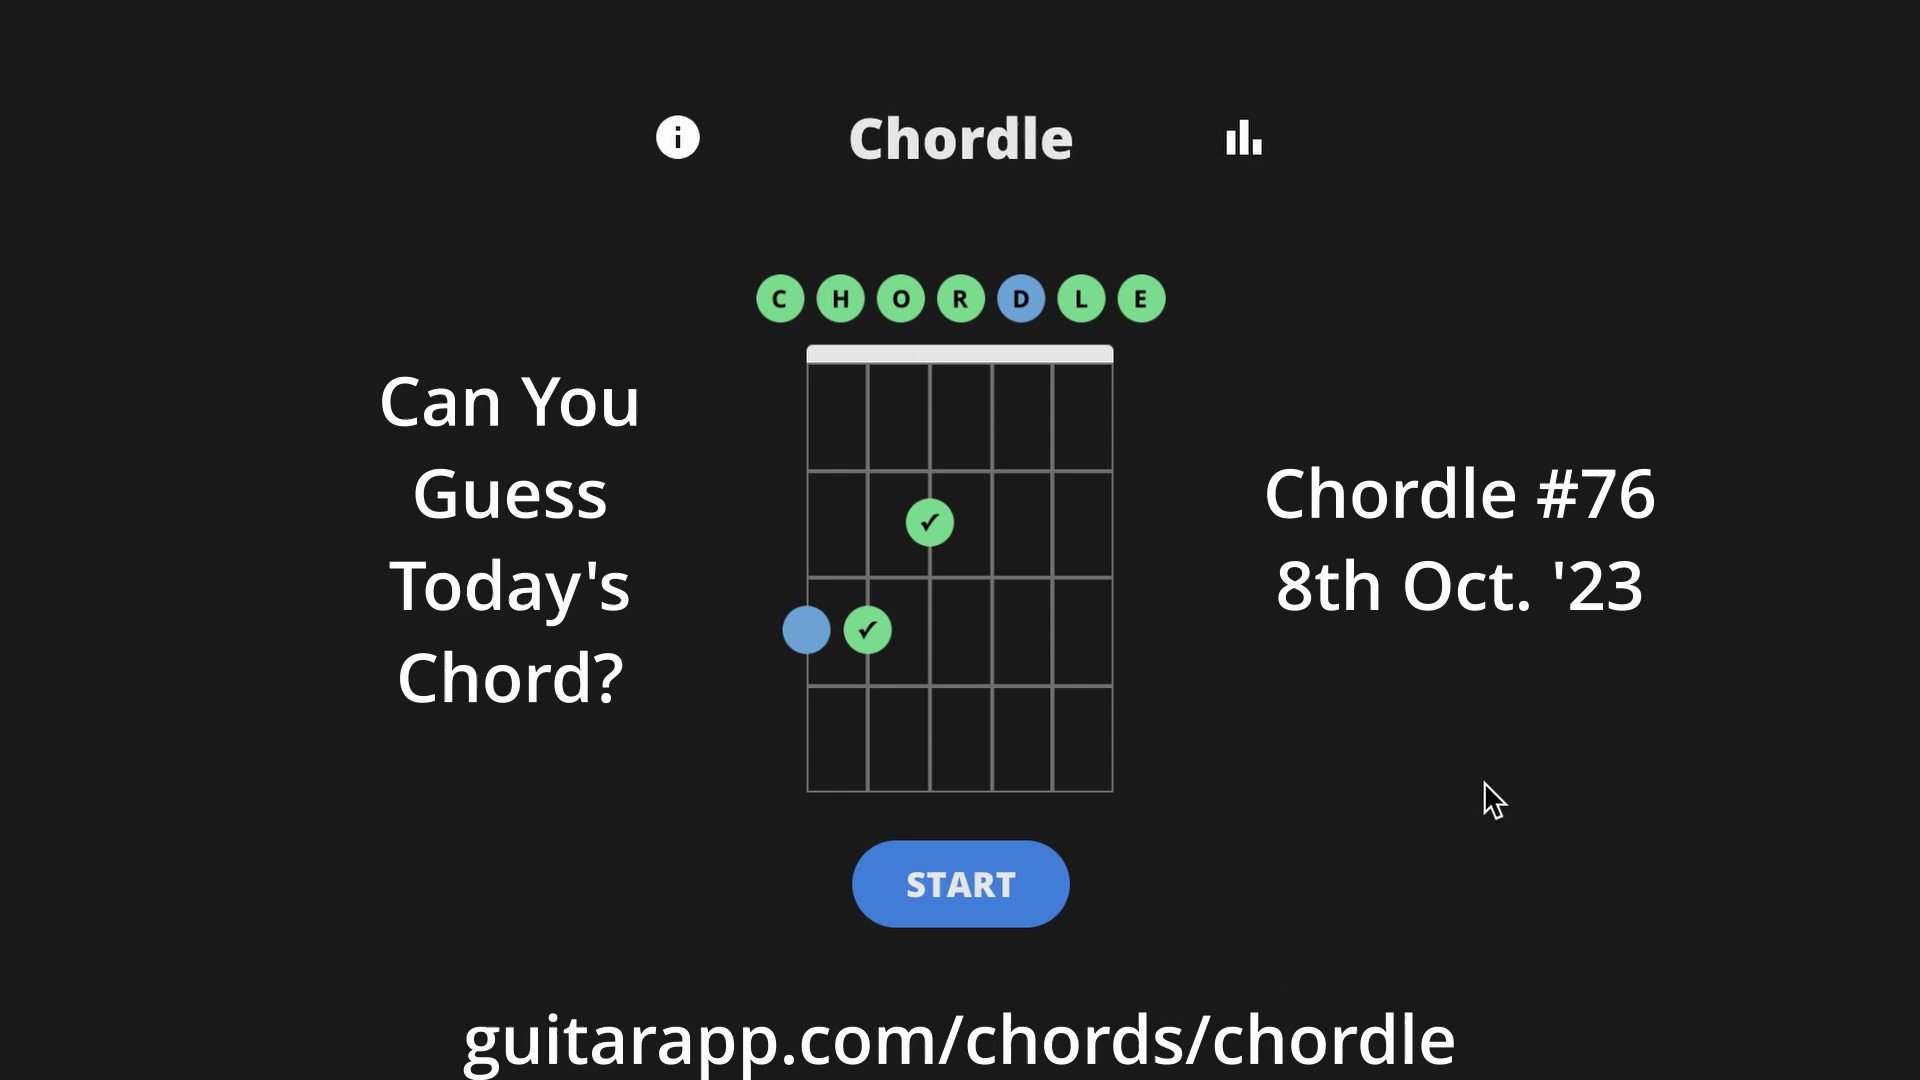 Chordle by GuitarApp  A Chord Guessing Game Inspired by Wordle